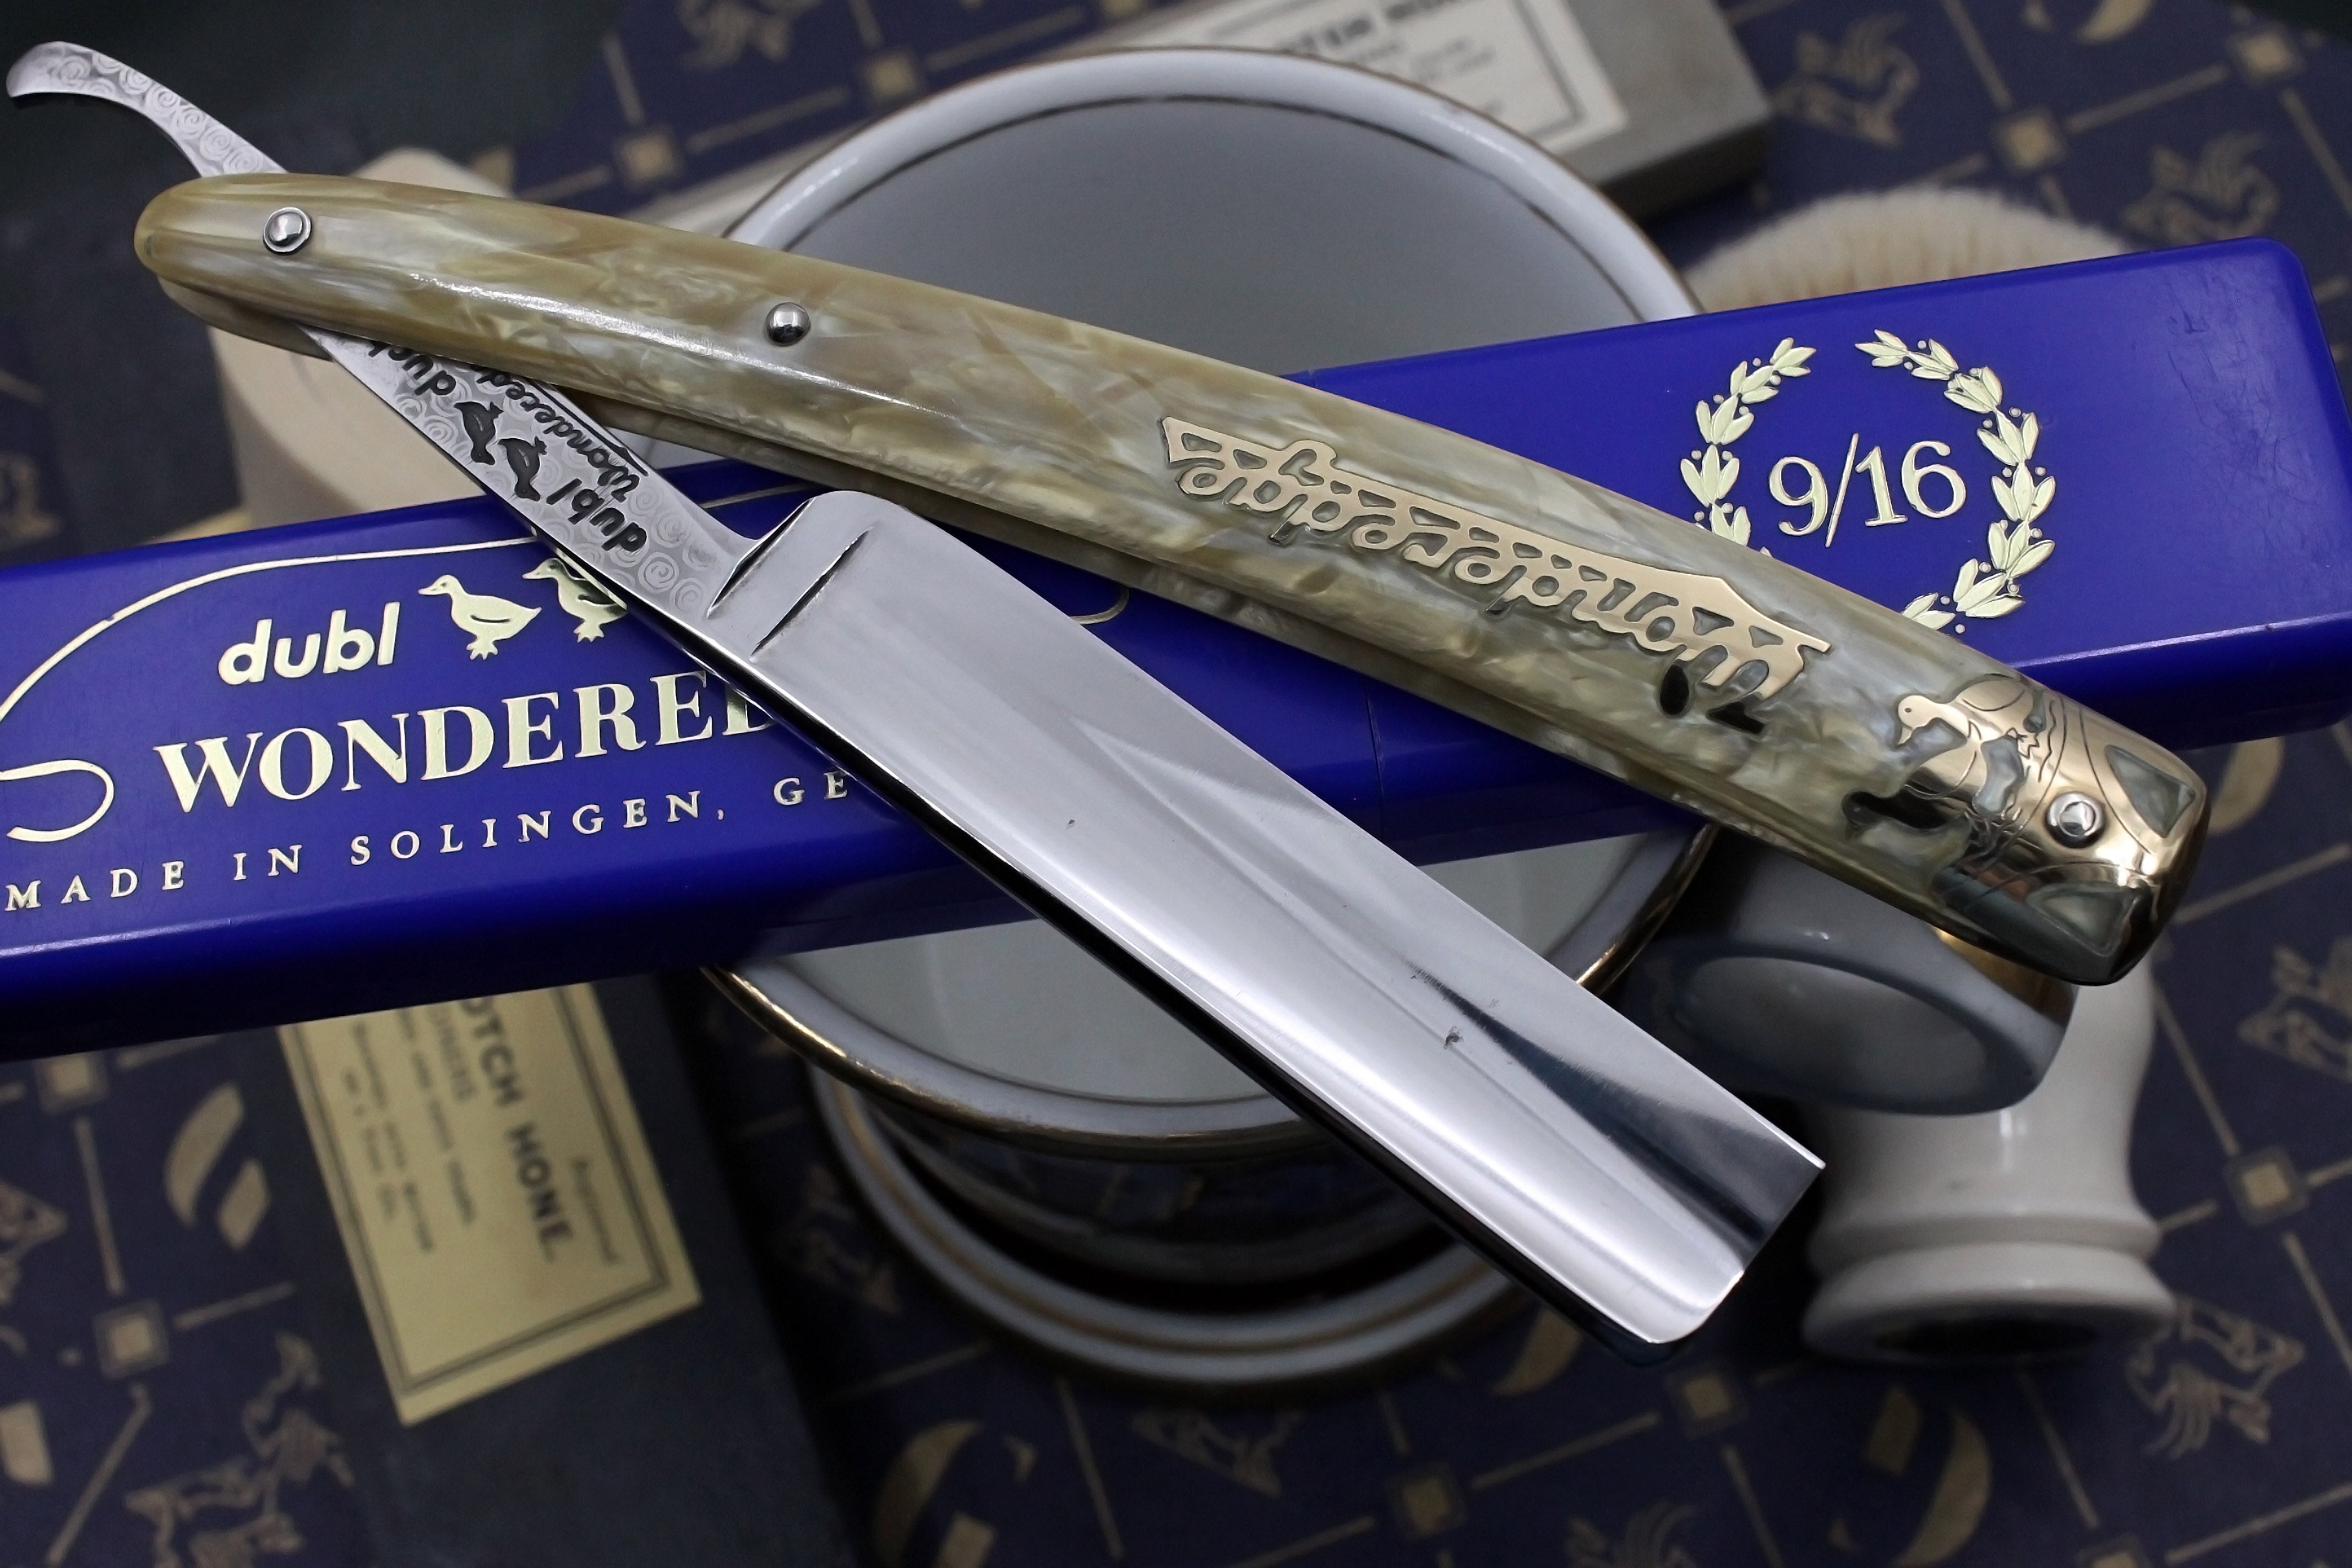 Dubl Duck Wonderedge 9/16 Blade Cracked Ice Scales - Fully Restored Vintage Solingen Straight Razor - Shave Ready